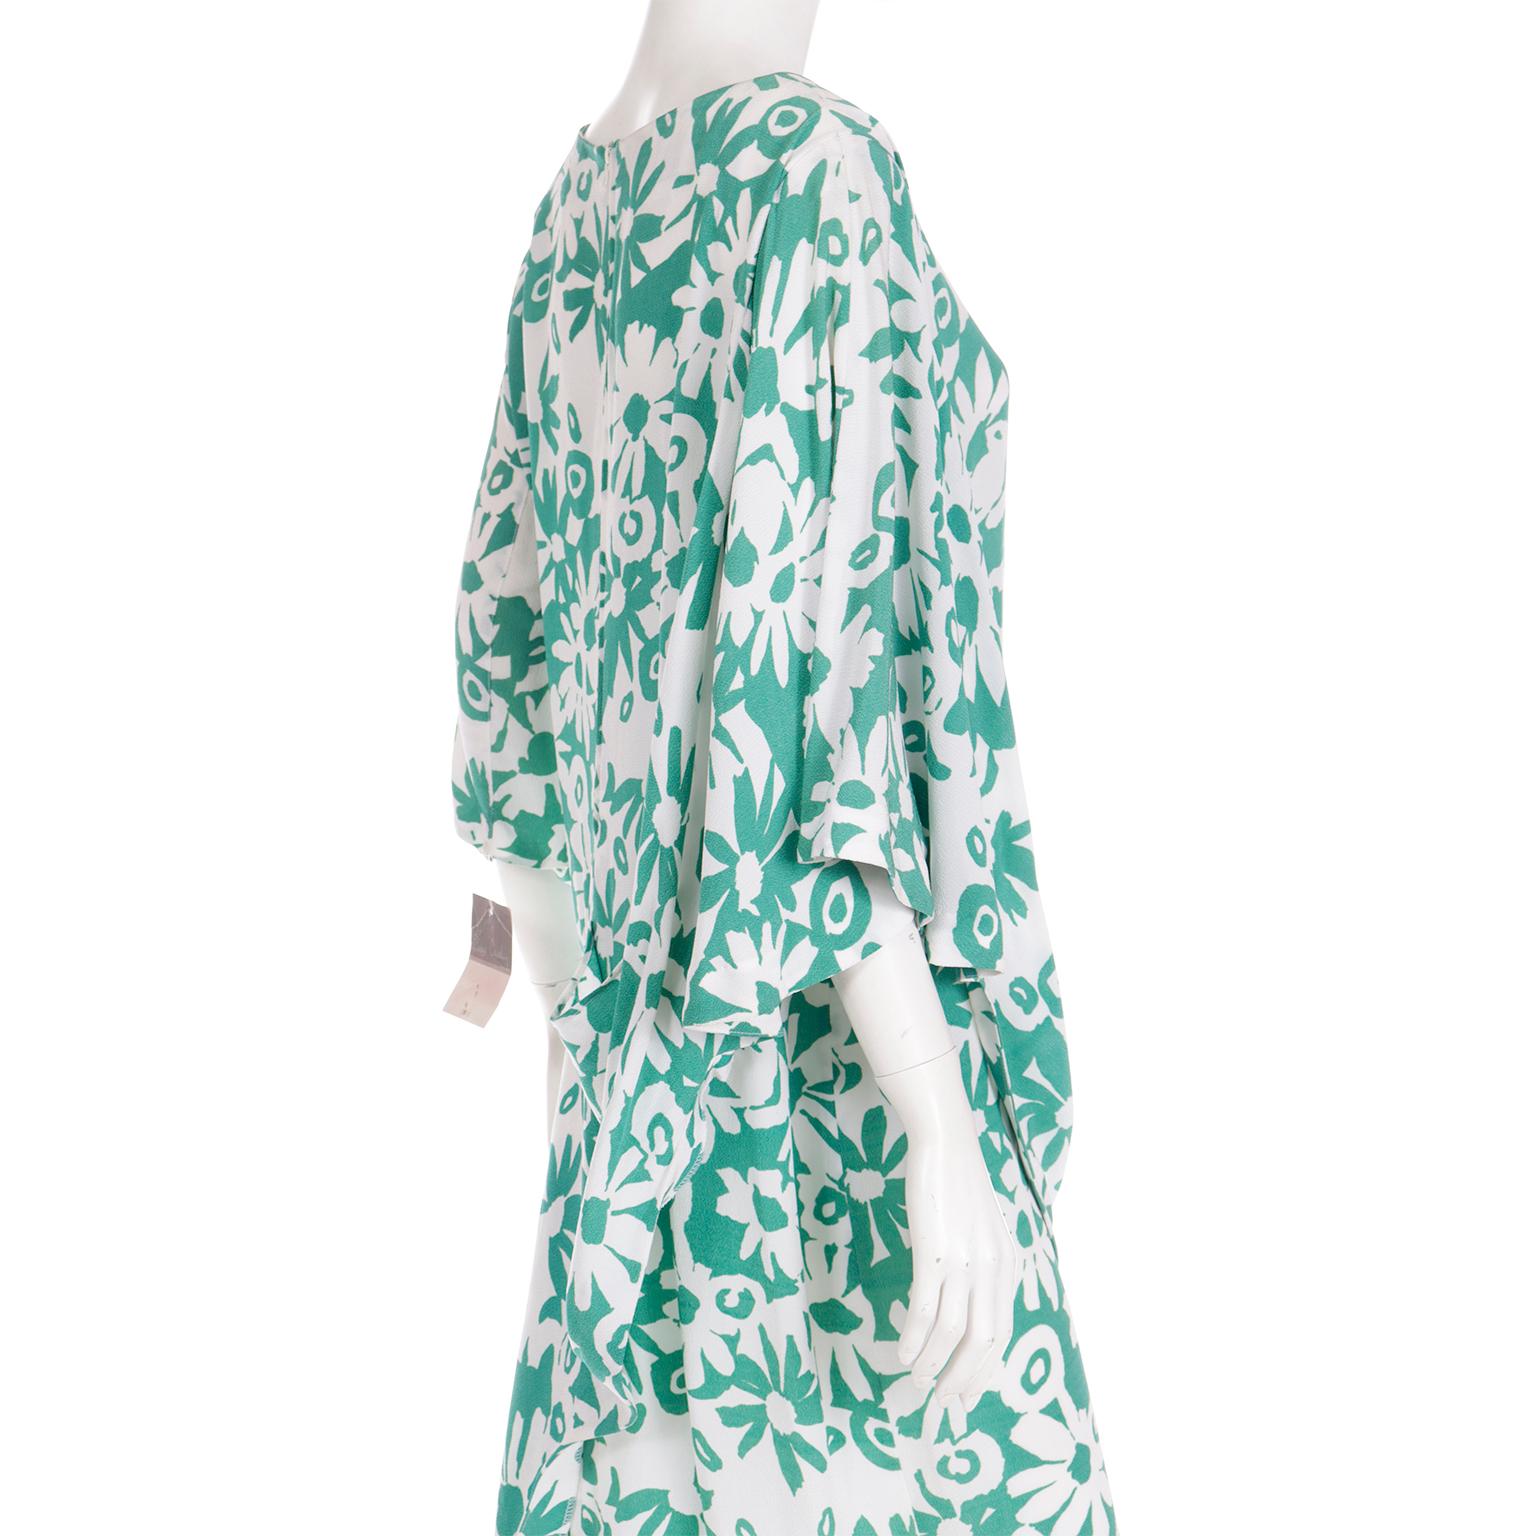 1980s Pierre Cardin Green and White Floral Asymmetrical Dress with Side Tie For Sale 4